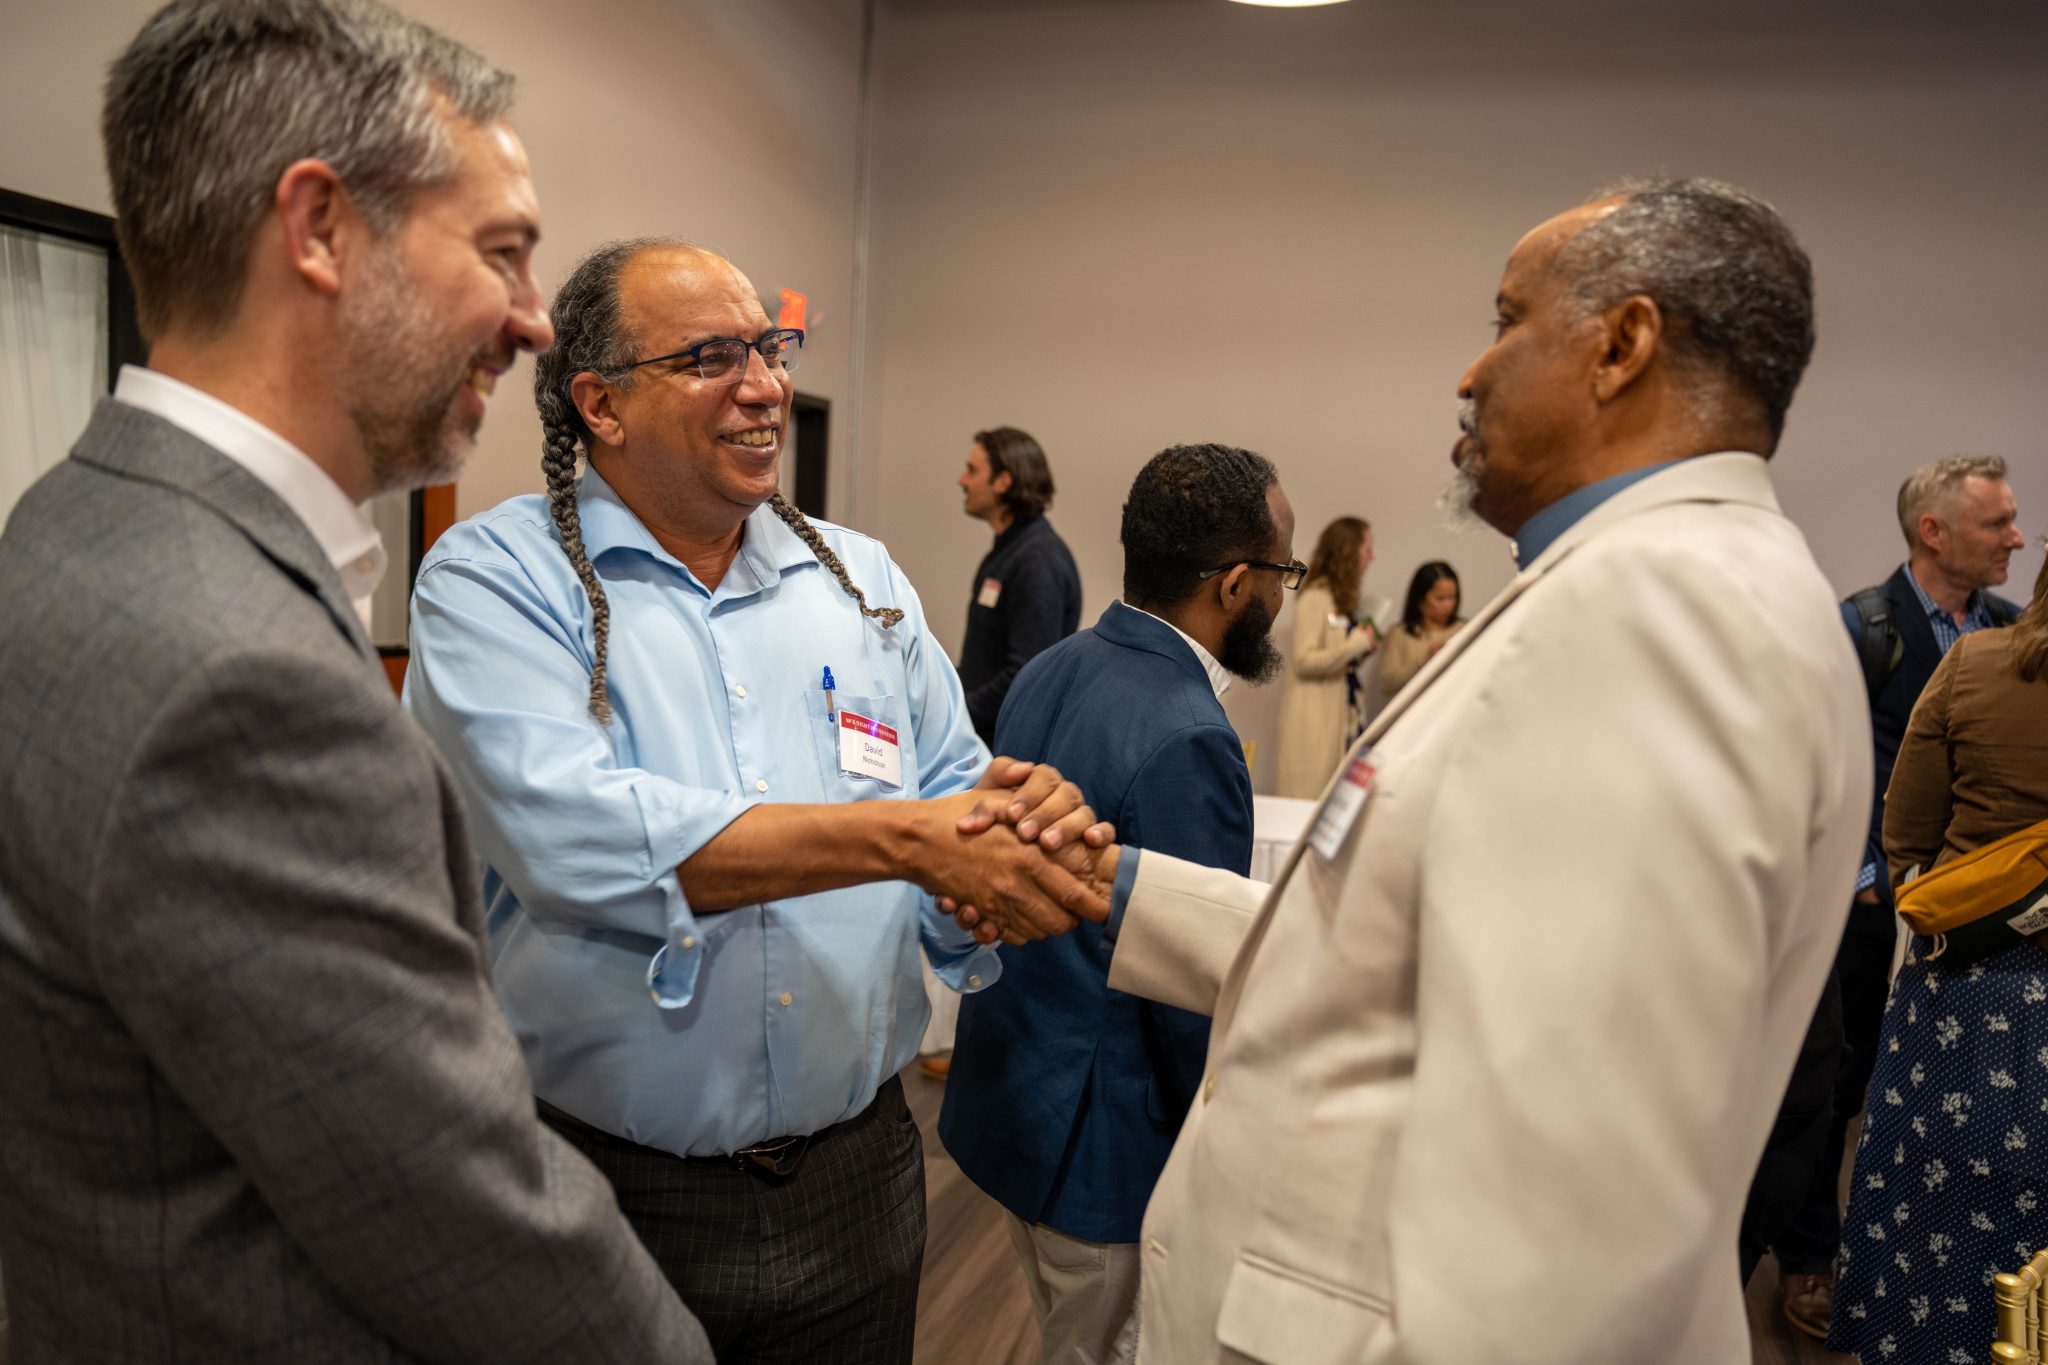 In a room of mingling people, a multiracial group of three men shake hands. Left to right: former Initiative Foundation President Matt Varilek. Vibrant & Equitable Communities Director David Nicholson, and Jama Alimed, an elder and leader in St. Cloud's Somali Community.